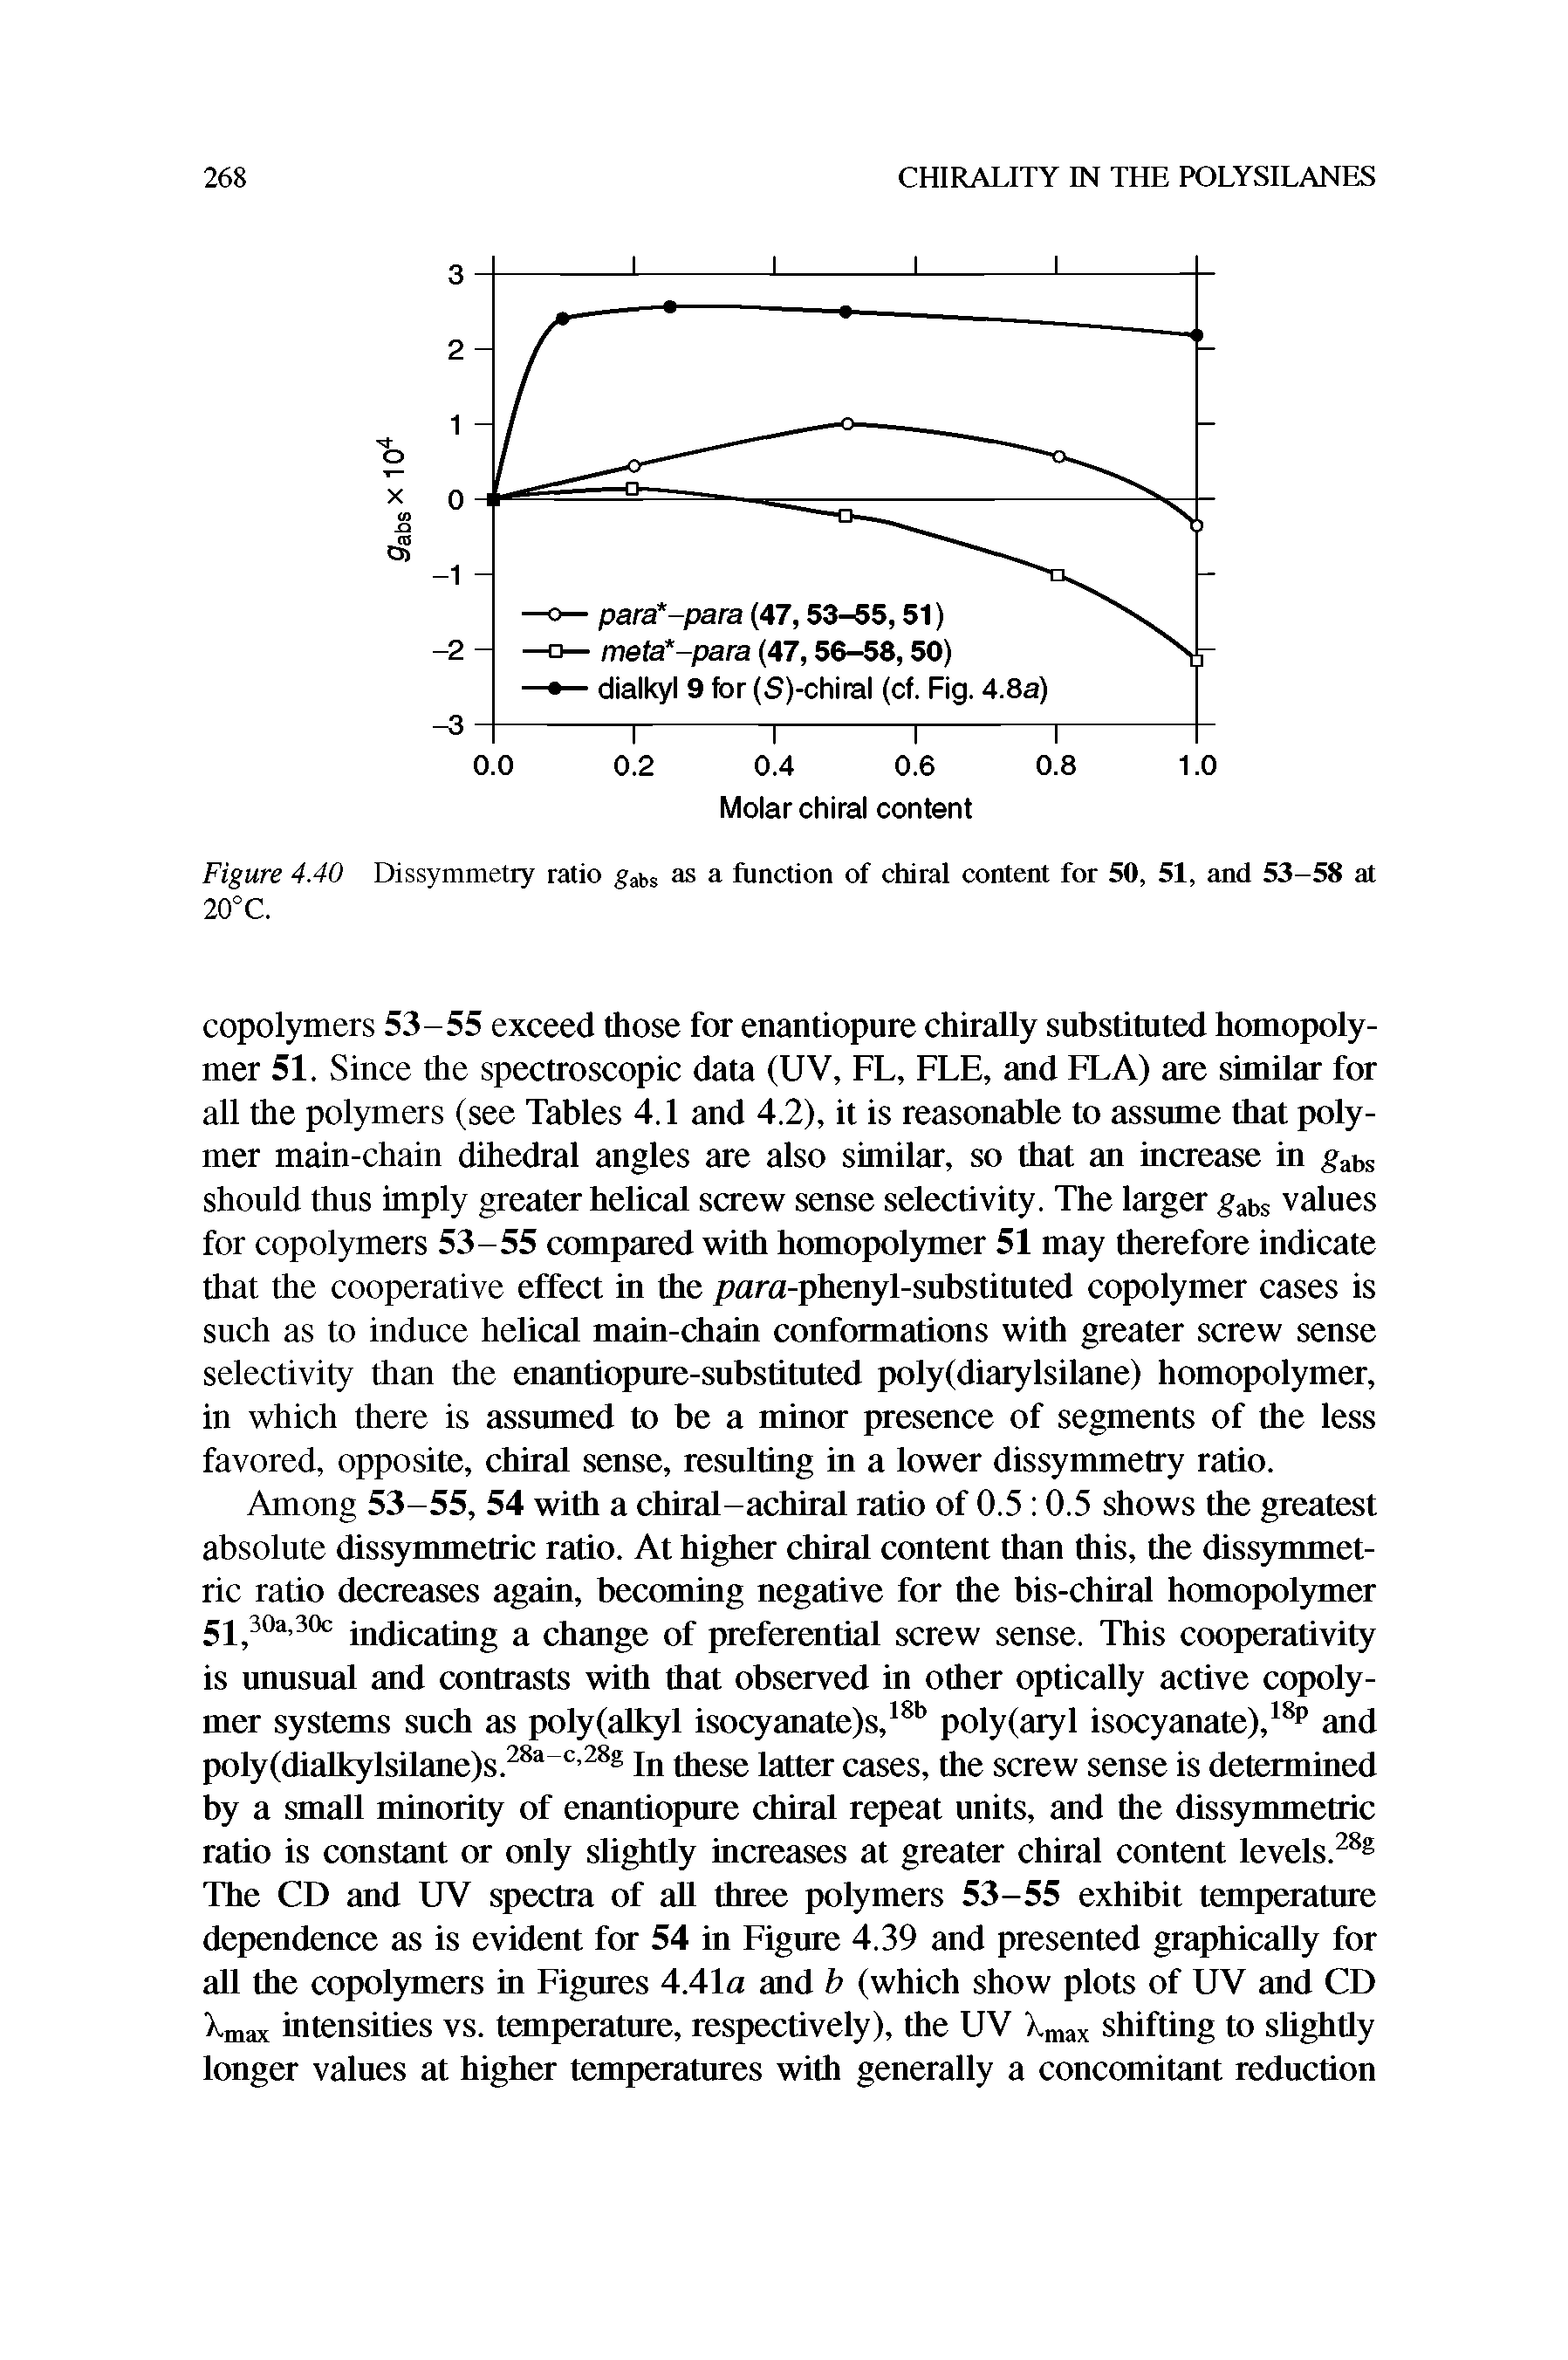 Figure 4.40 Dissymmetry ratio gabs as a function of chiral content for 50, 51, and 53-58 at 20°C.